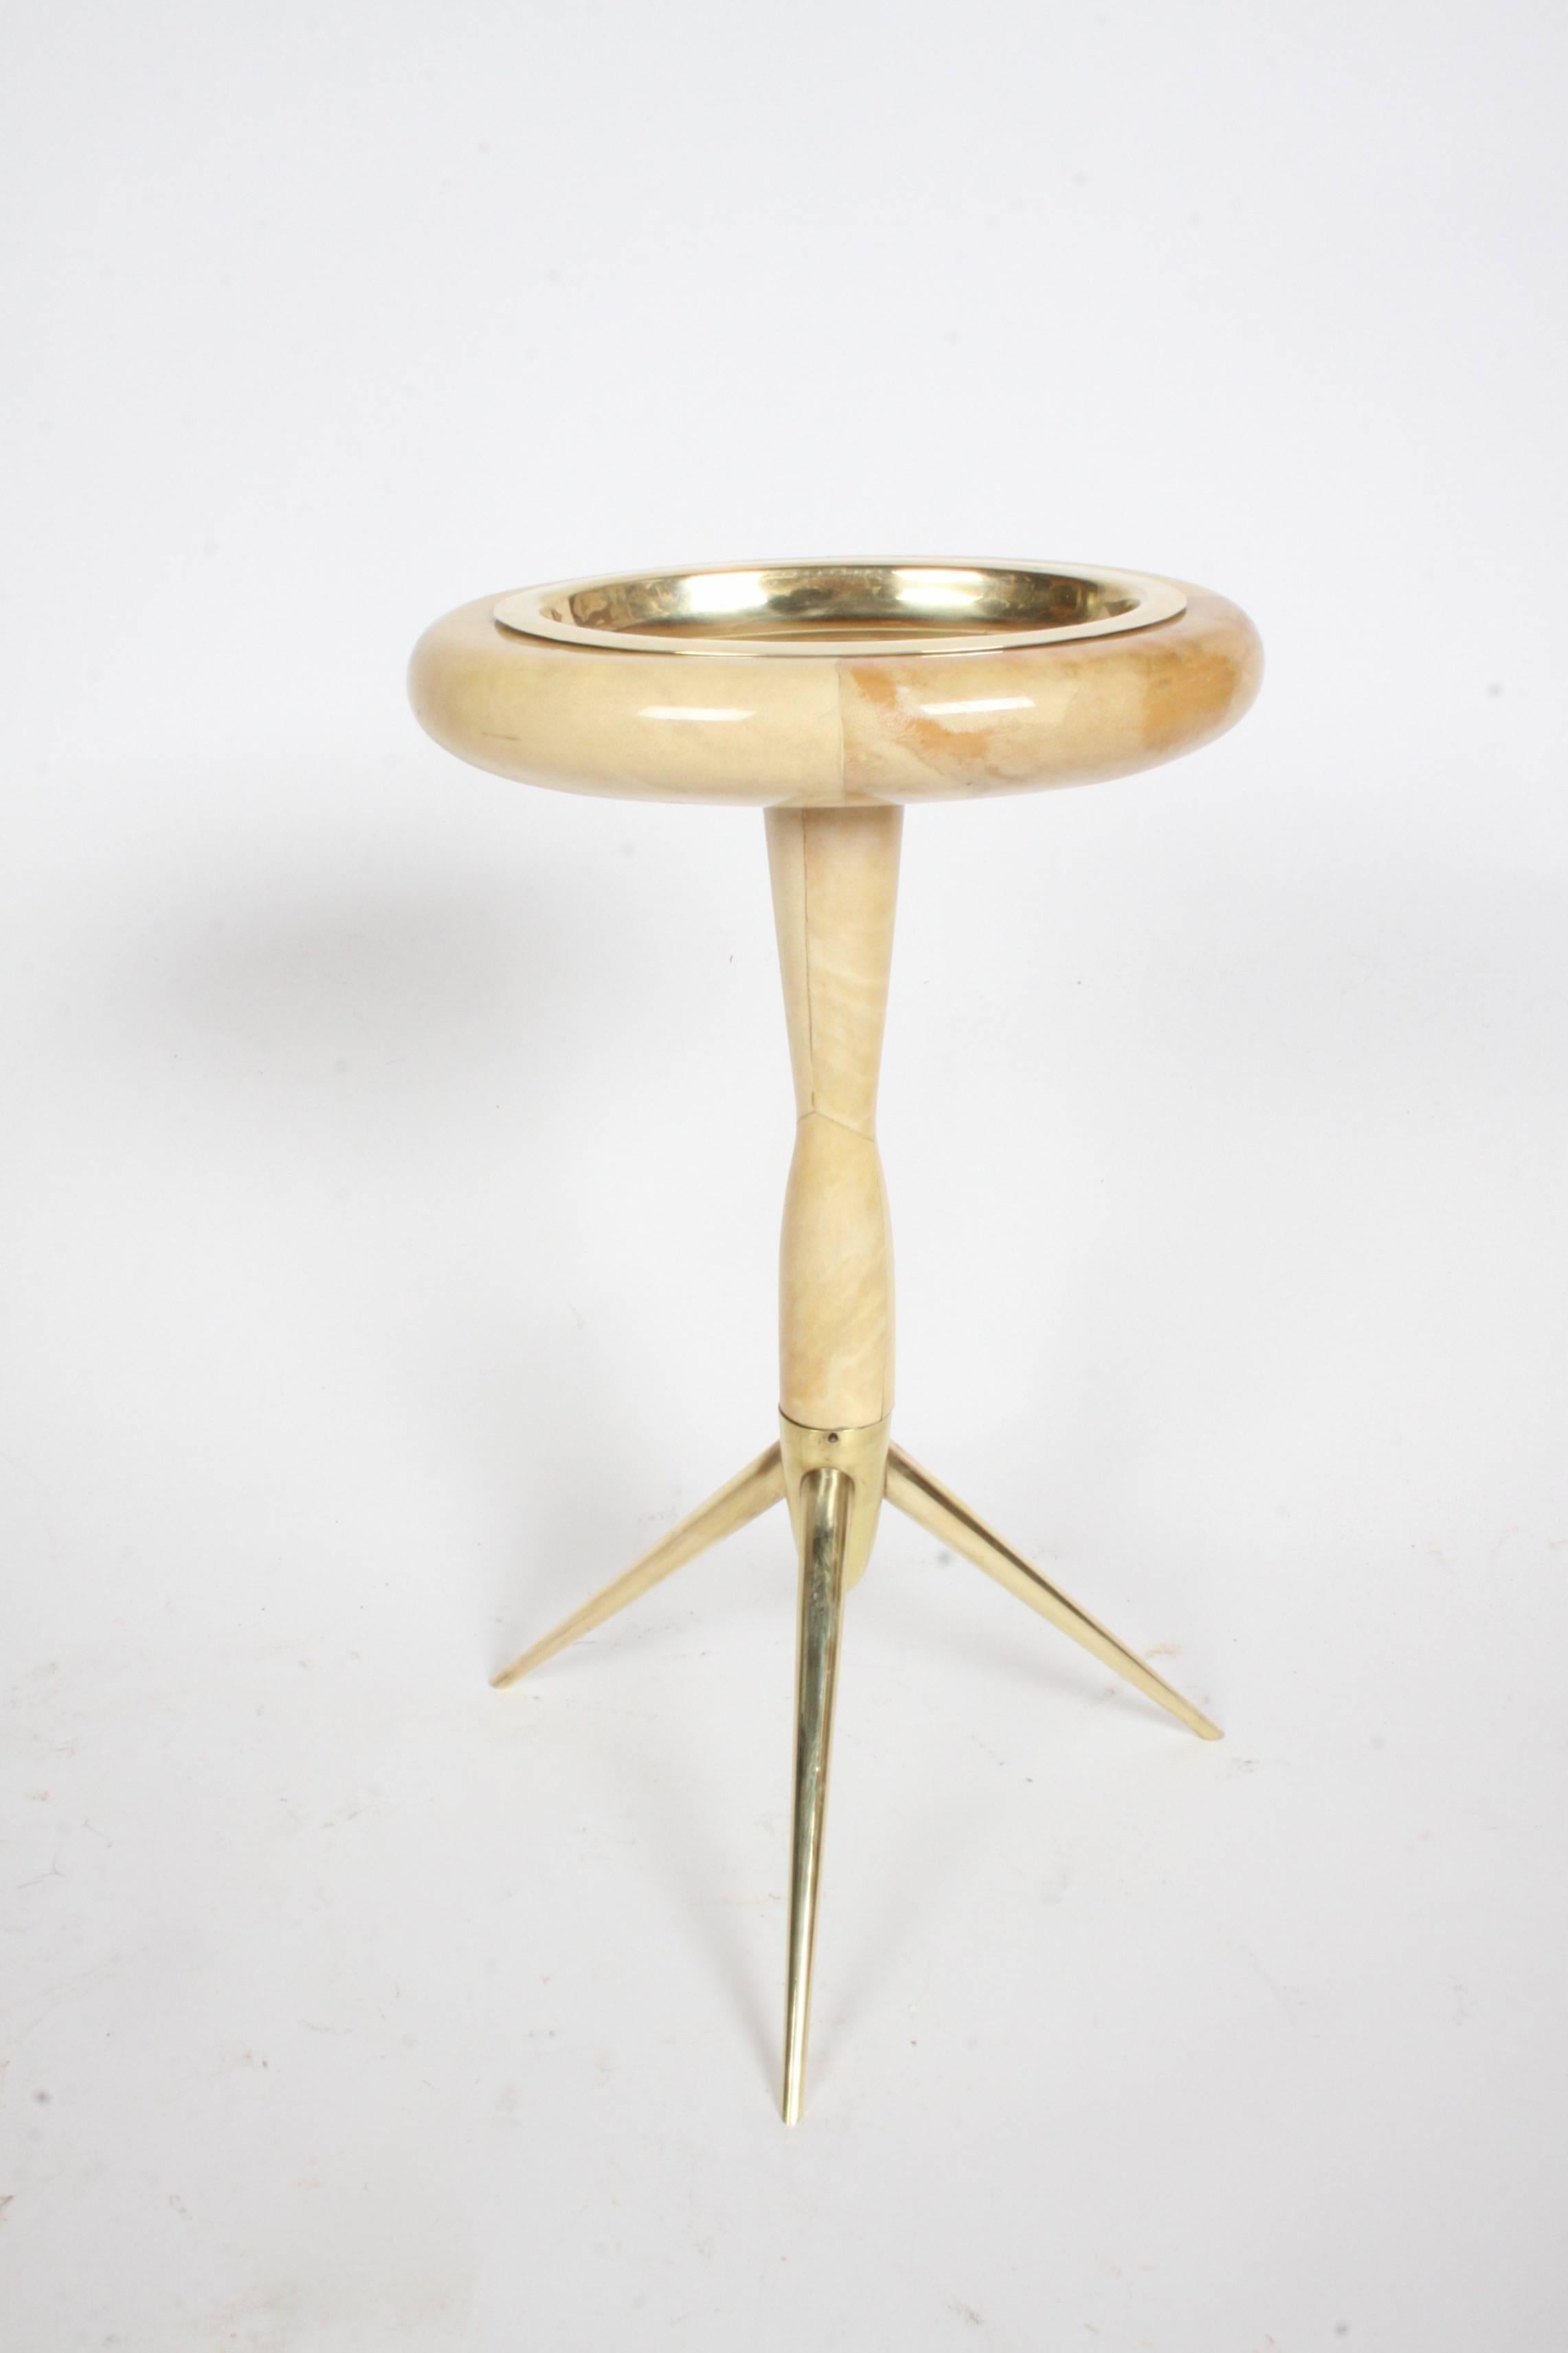 Italian sculptural Aldo Tura goatskin parchment side or snack table with brass tripod legs and brass removable tray. Minor dings to tray. Labelled Tura.